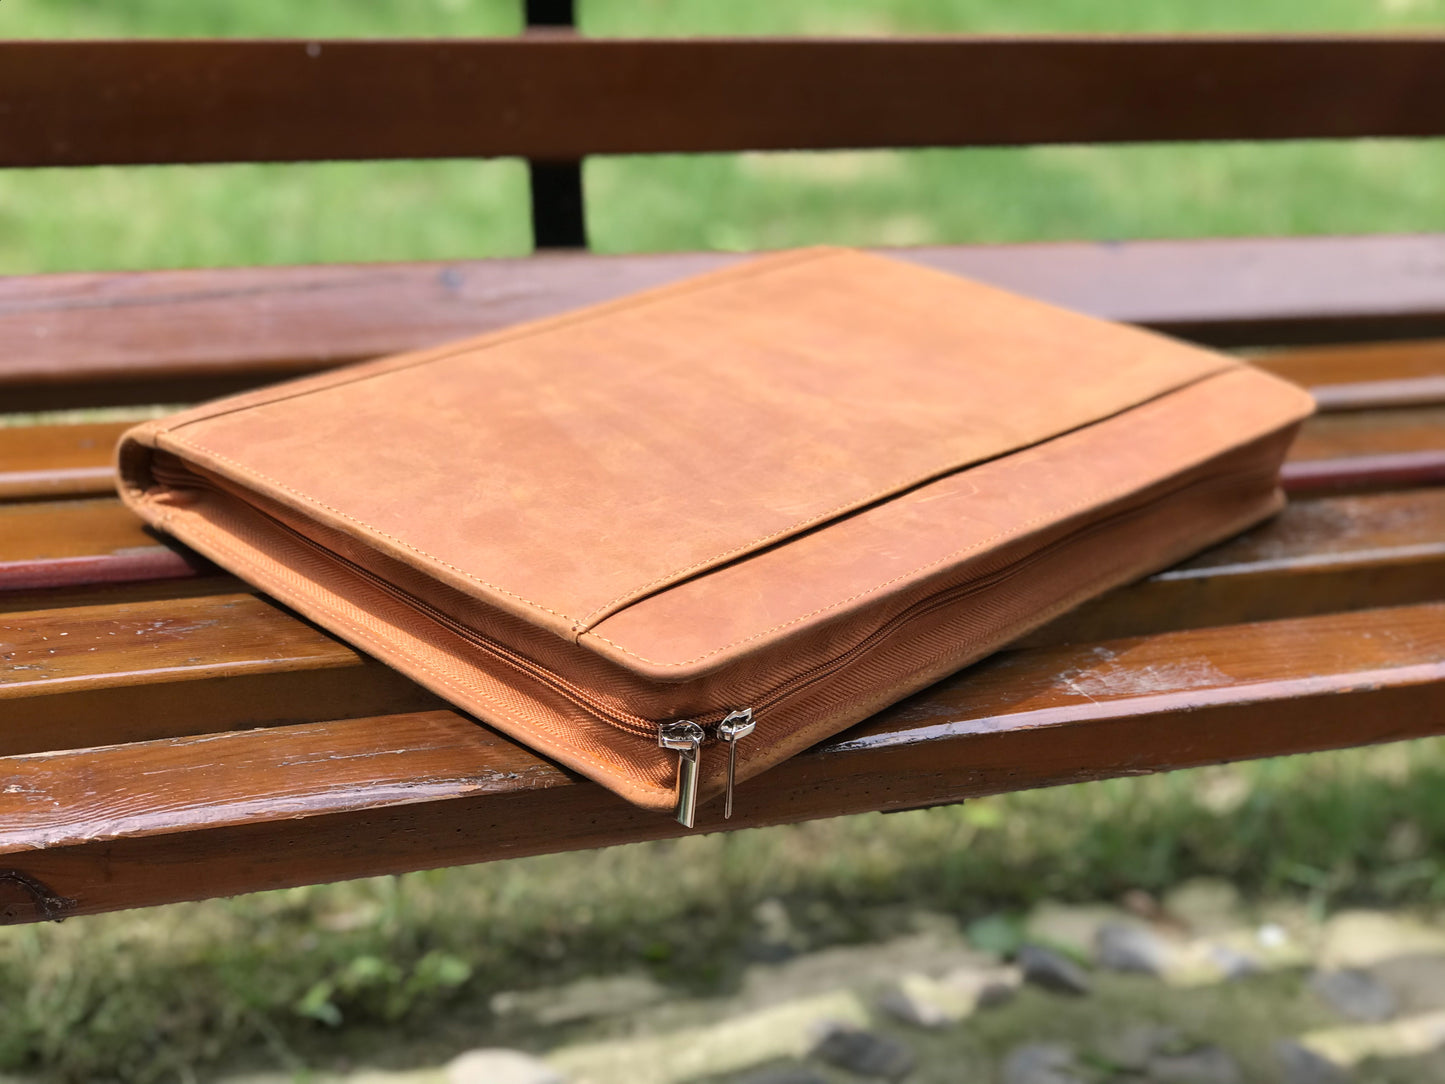 Genuine Leather Portfolio, Zipper Business Organizer, Padfolio for Legal Paper/ A4 Size Notepad/ MacBook, Birthday Gifts for Men